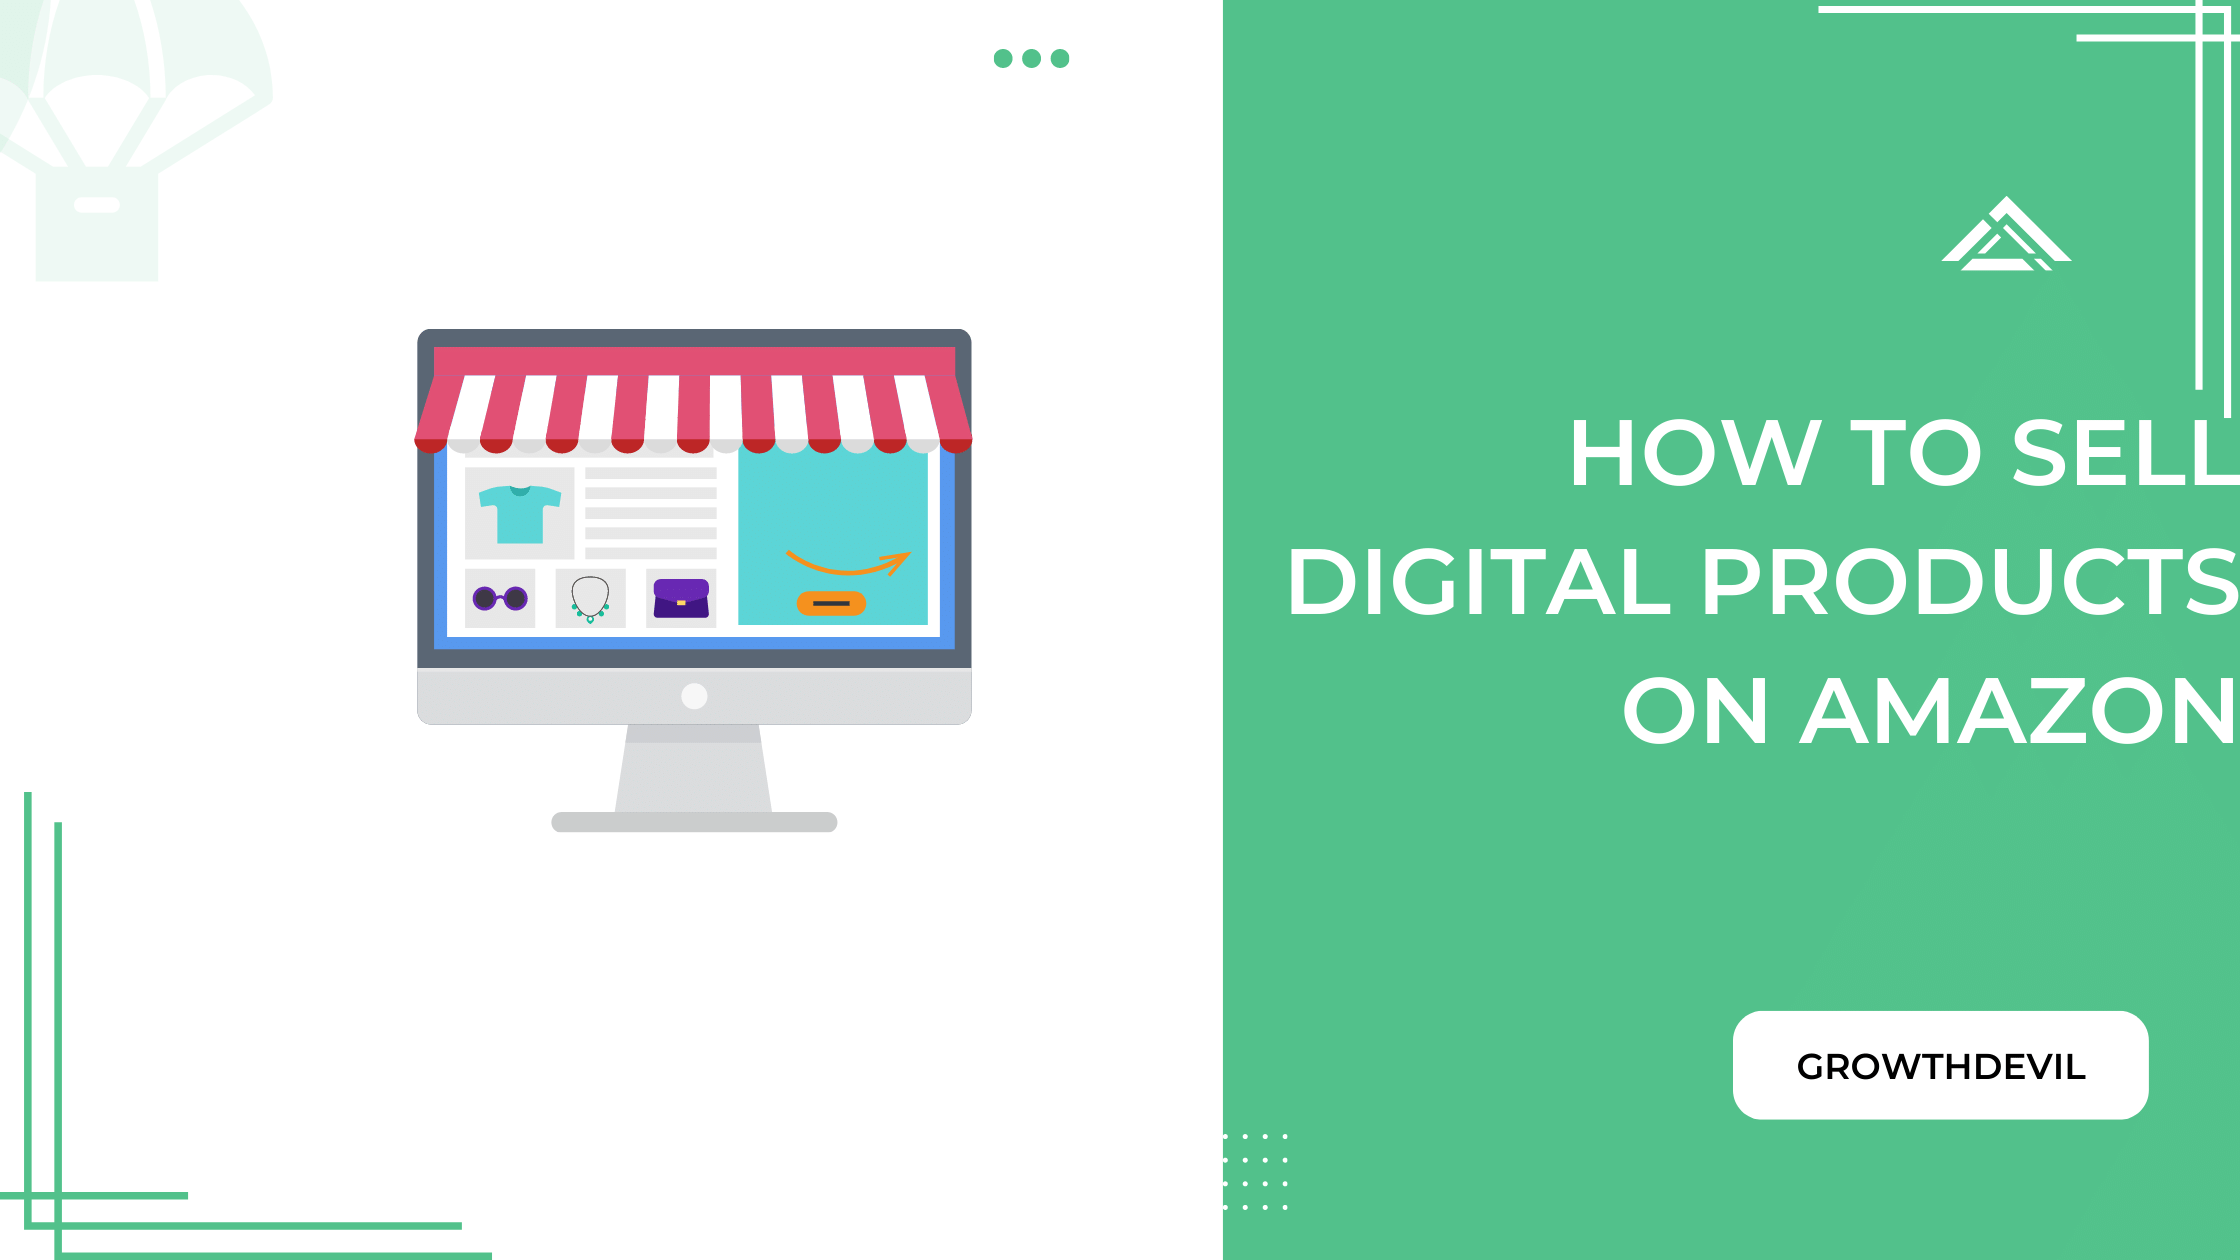 How To Sell Digital Products On Amazon - GrowthDevil